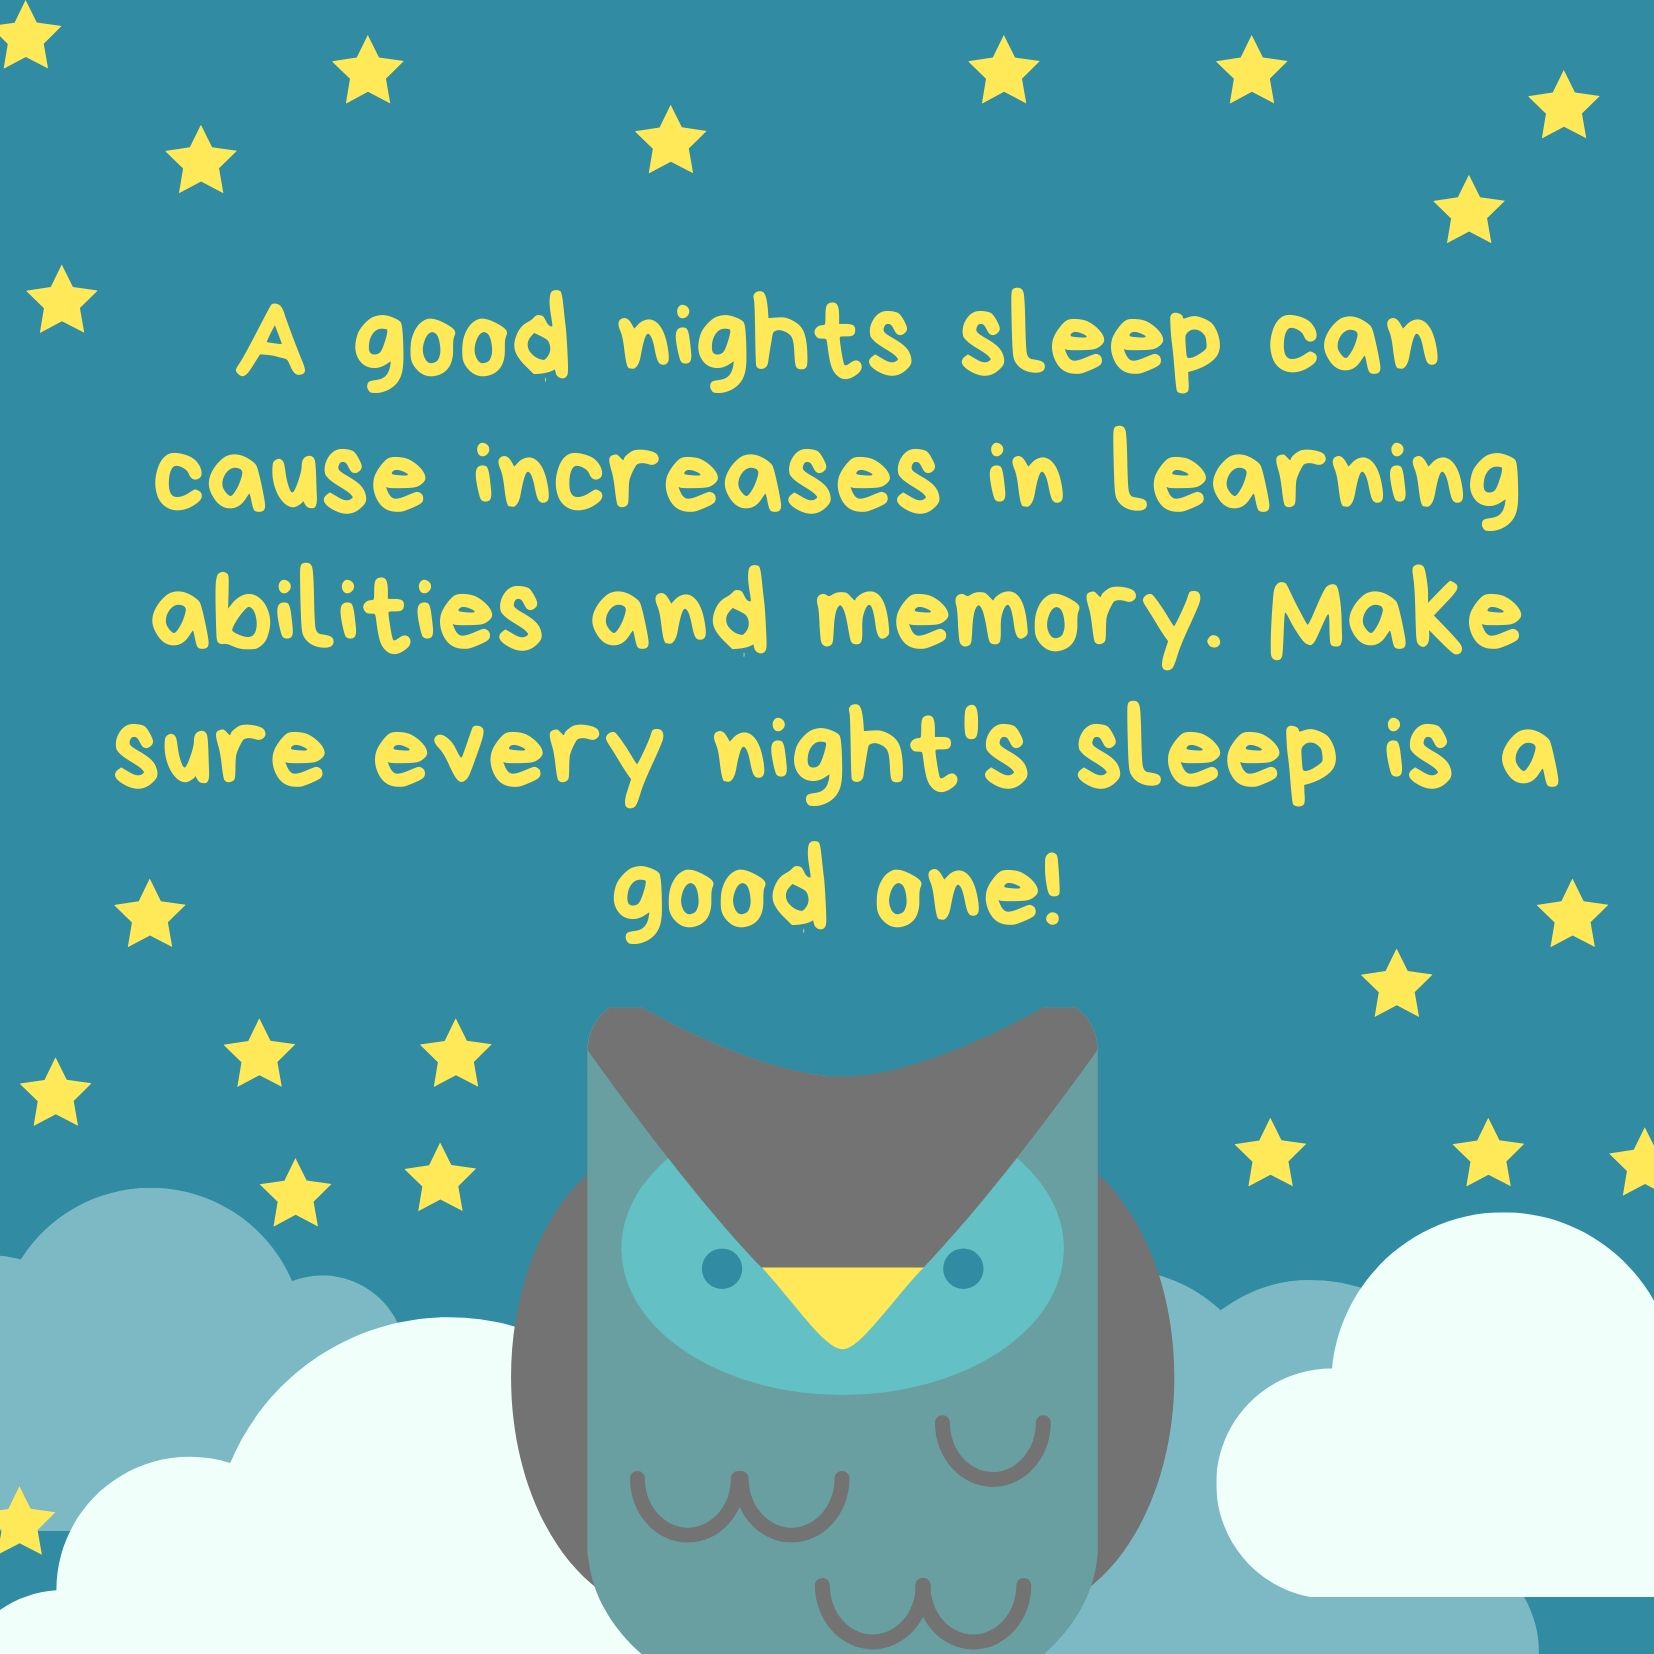 A good nights sleep can cause increases learning abilities and memory. Make sure every night's sleep is a good one!